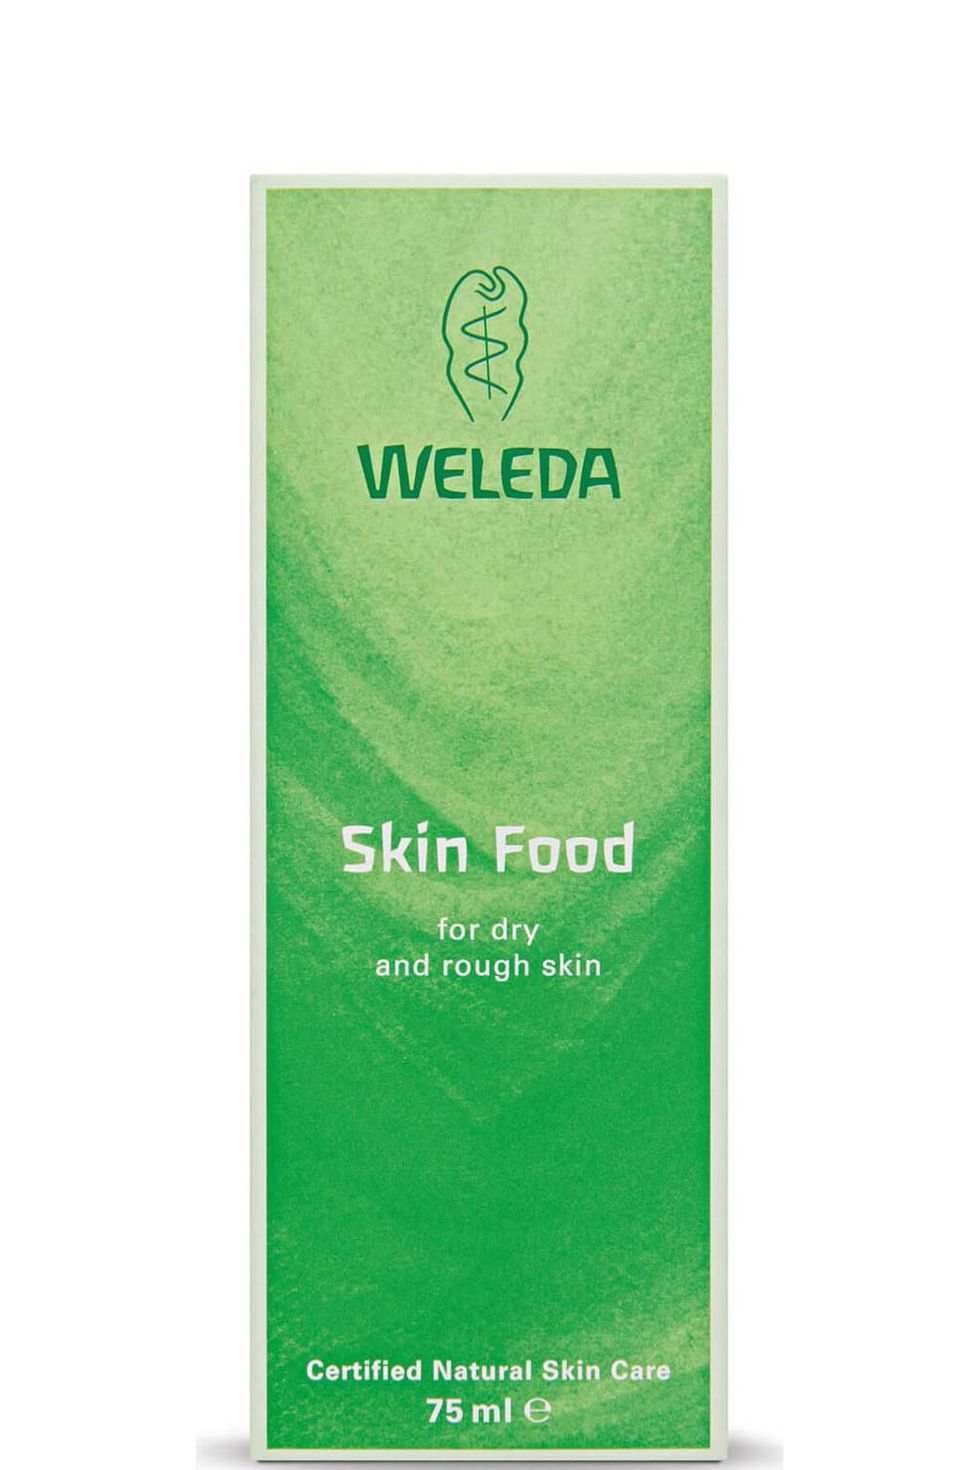 Weleda Skin Food for Dry and Rough Skin 